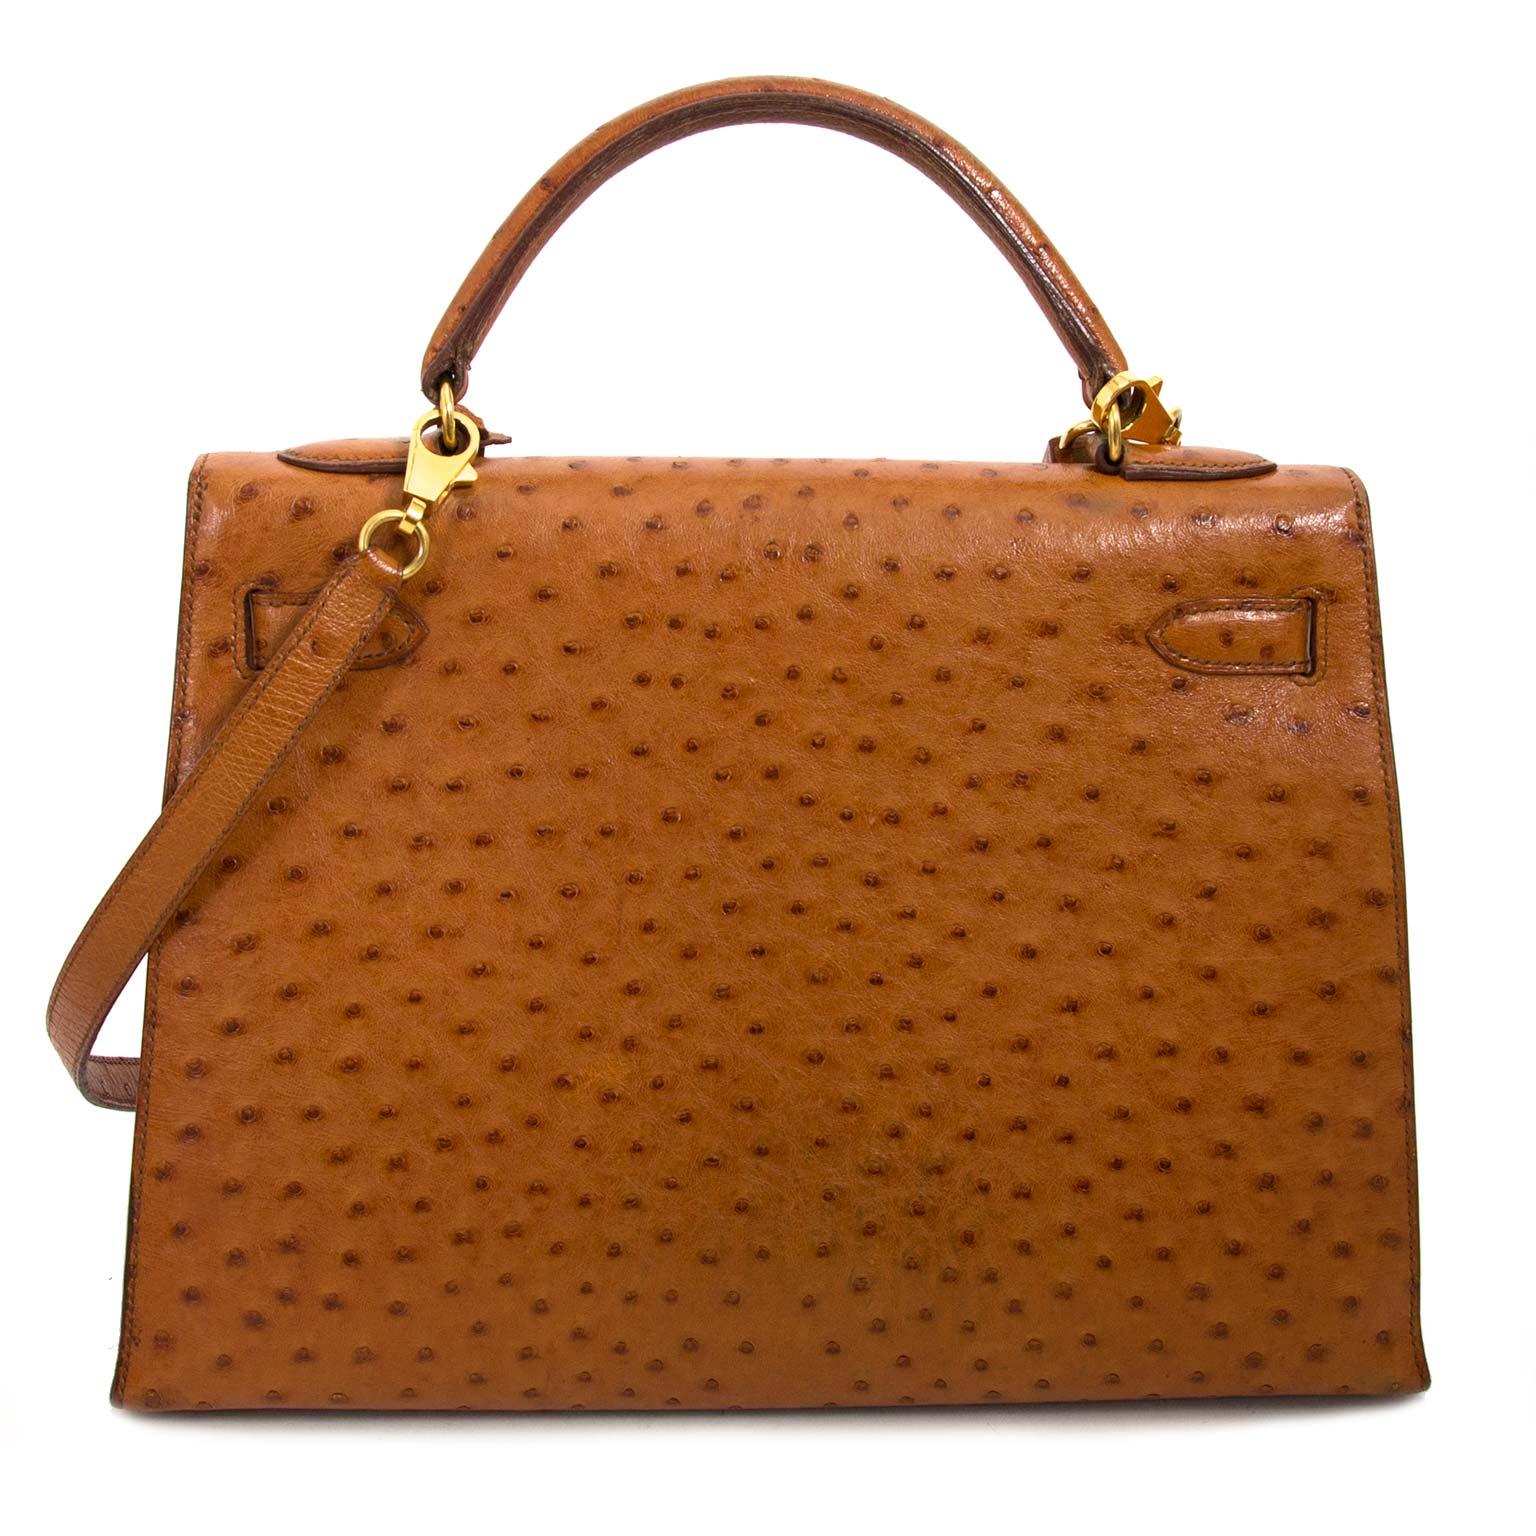 
If there's one bag that will never ever go out of style, it most certainly is the iconic Hermès Kelly. Its structured design and elegant features make this bag into a true IT-bag. This very rare and exclusive Hermès Kelly Ostrich 32 GHW features